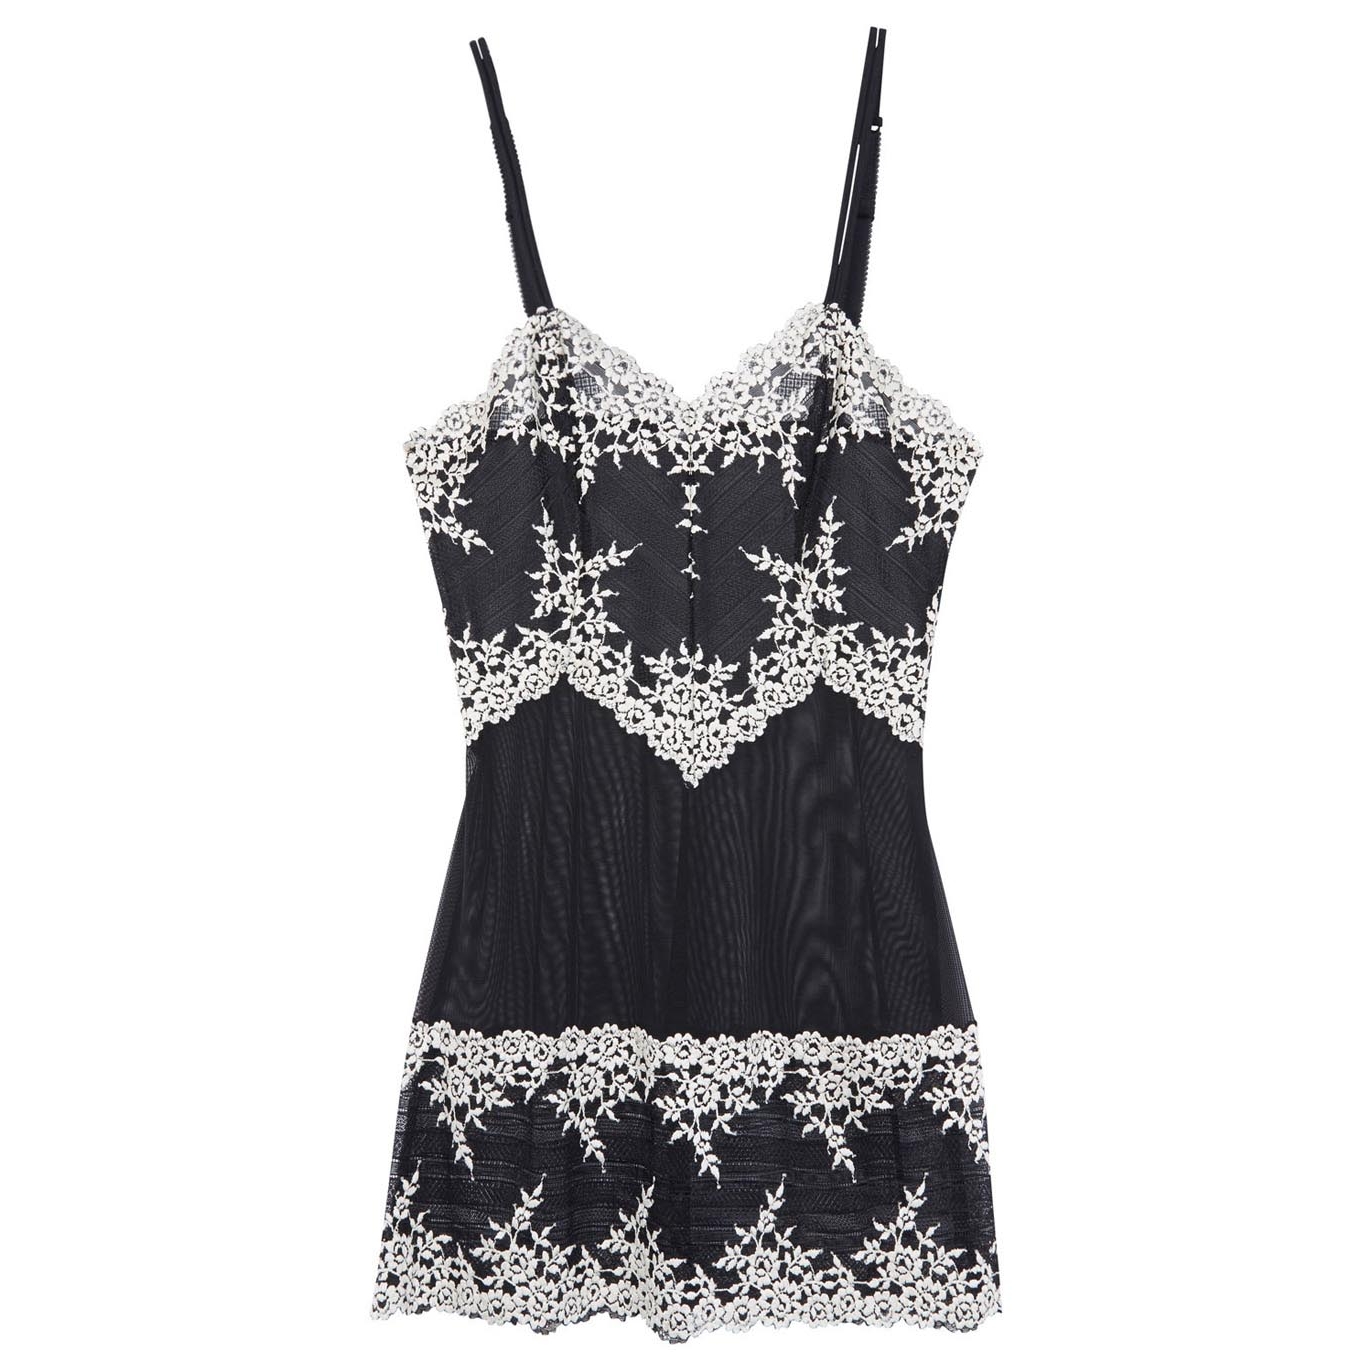 Wacoal Embrace Black Embroidered Tulle Chemise - XL